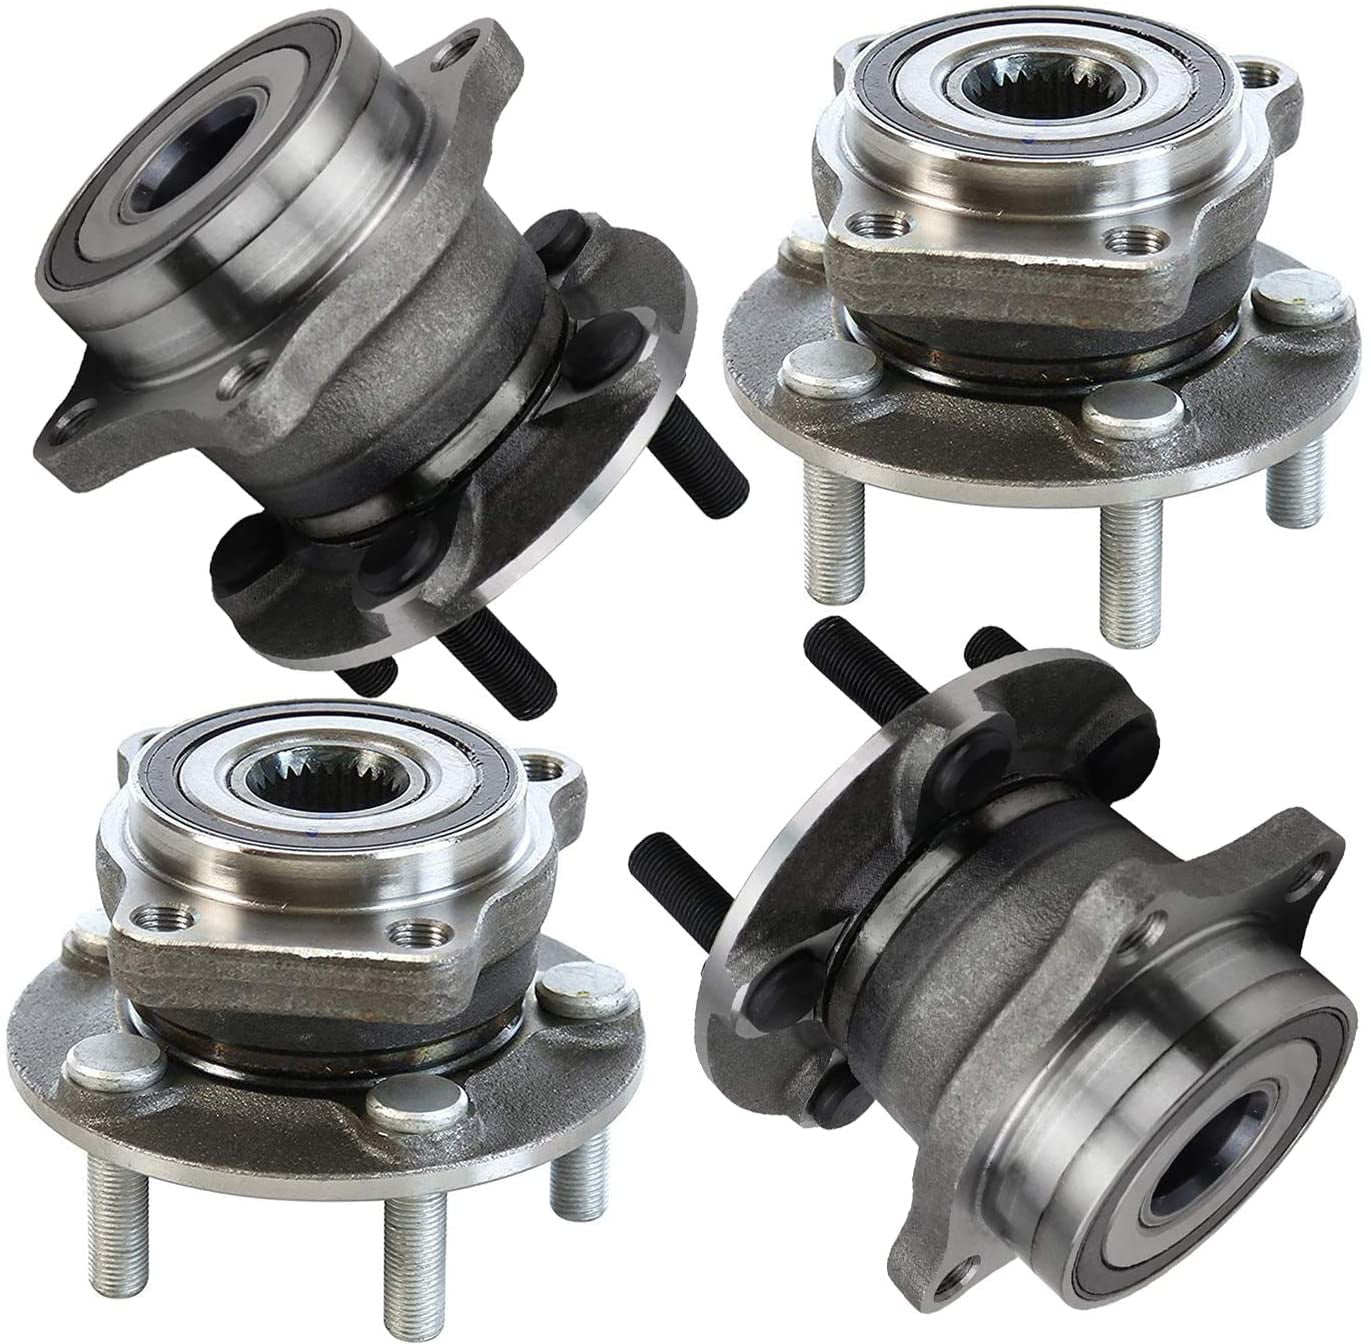 2 Detroit Axle Both 2010-2014 Legacy - 2009-2013 Subaru Forester For New REAR Wheel Hub & Bearing Assembly for 2010-2014 Outback